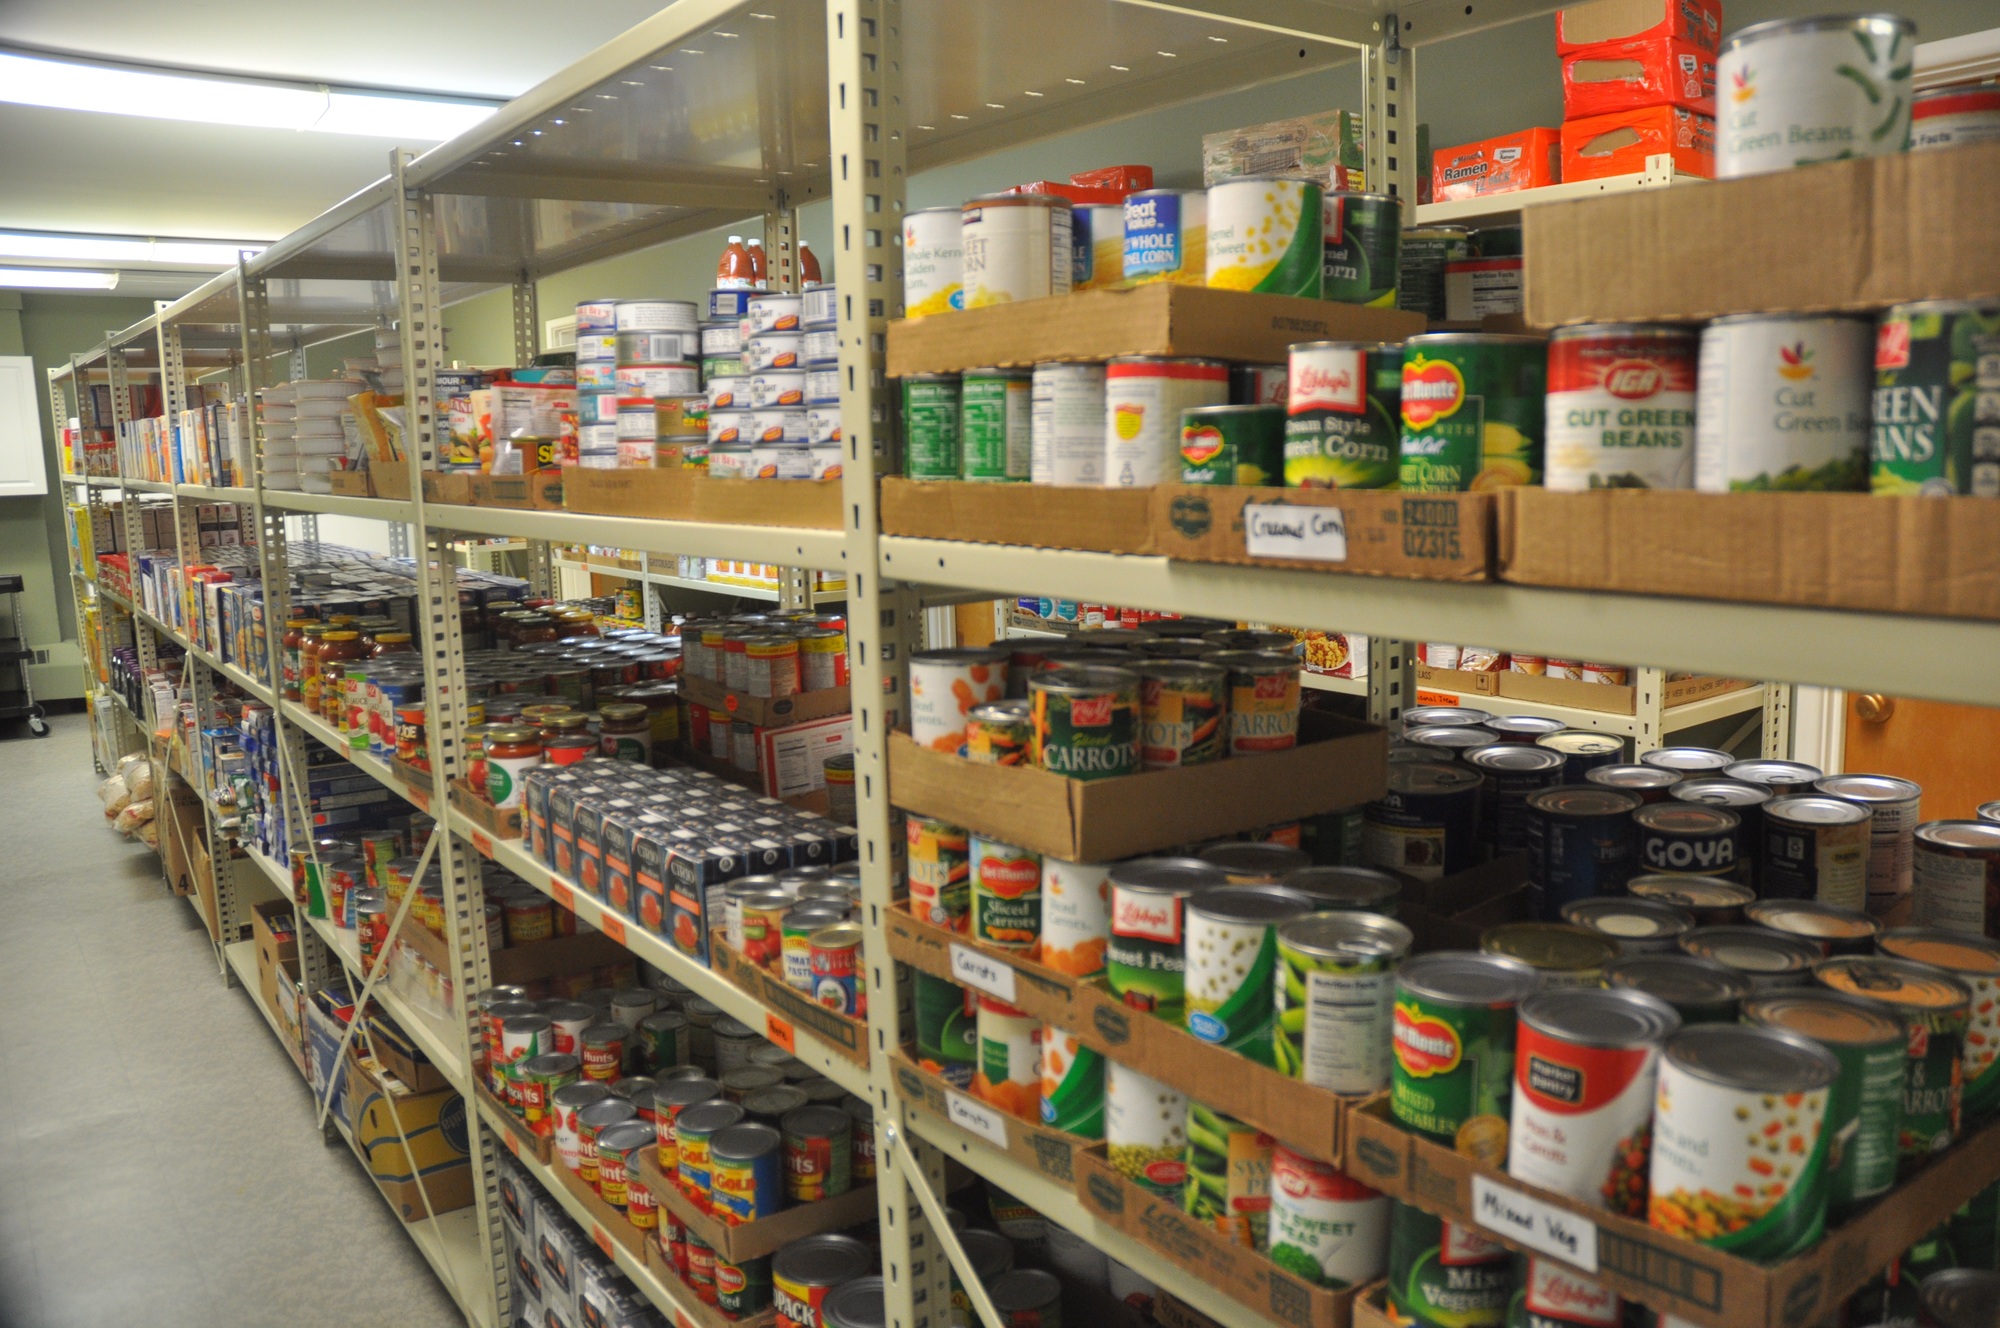 The Food Pantry of North Branford